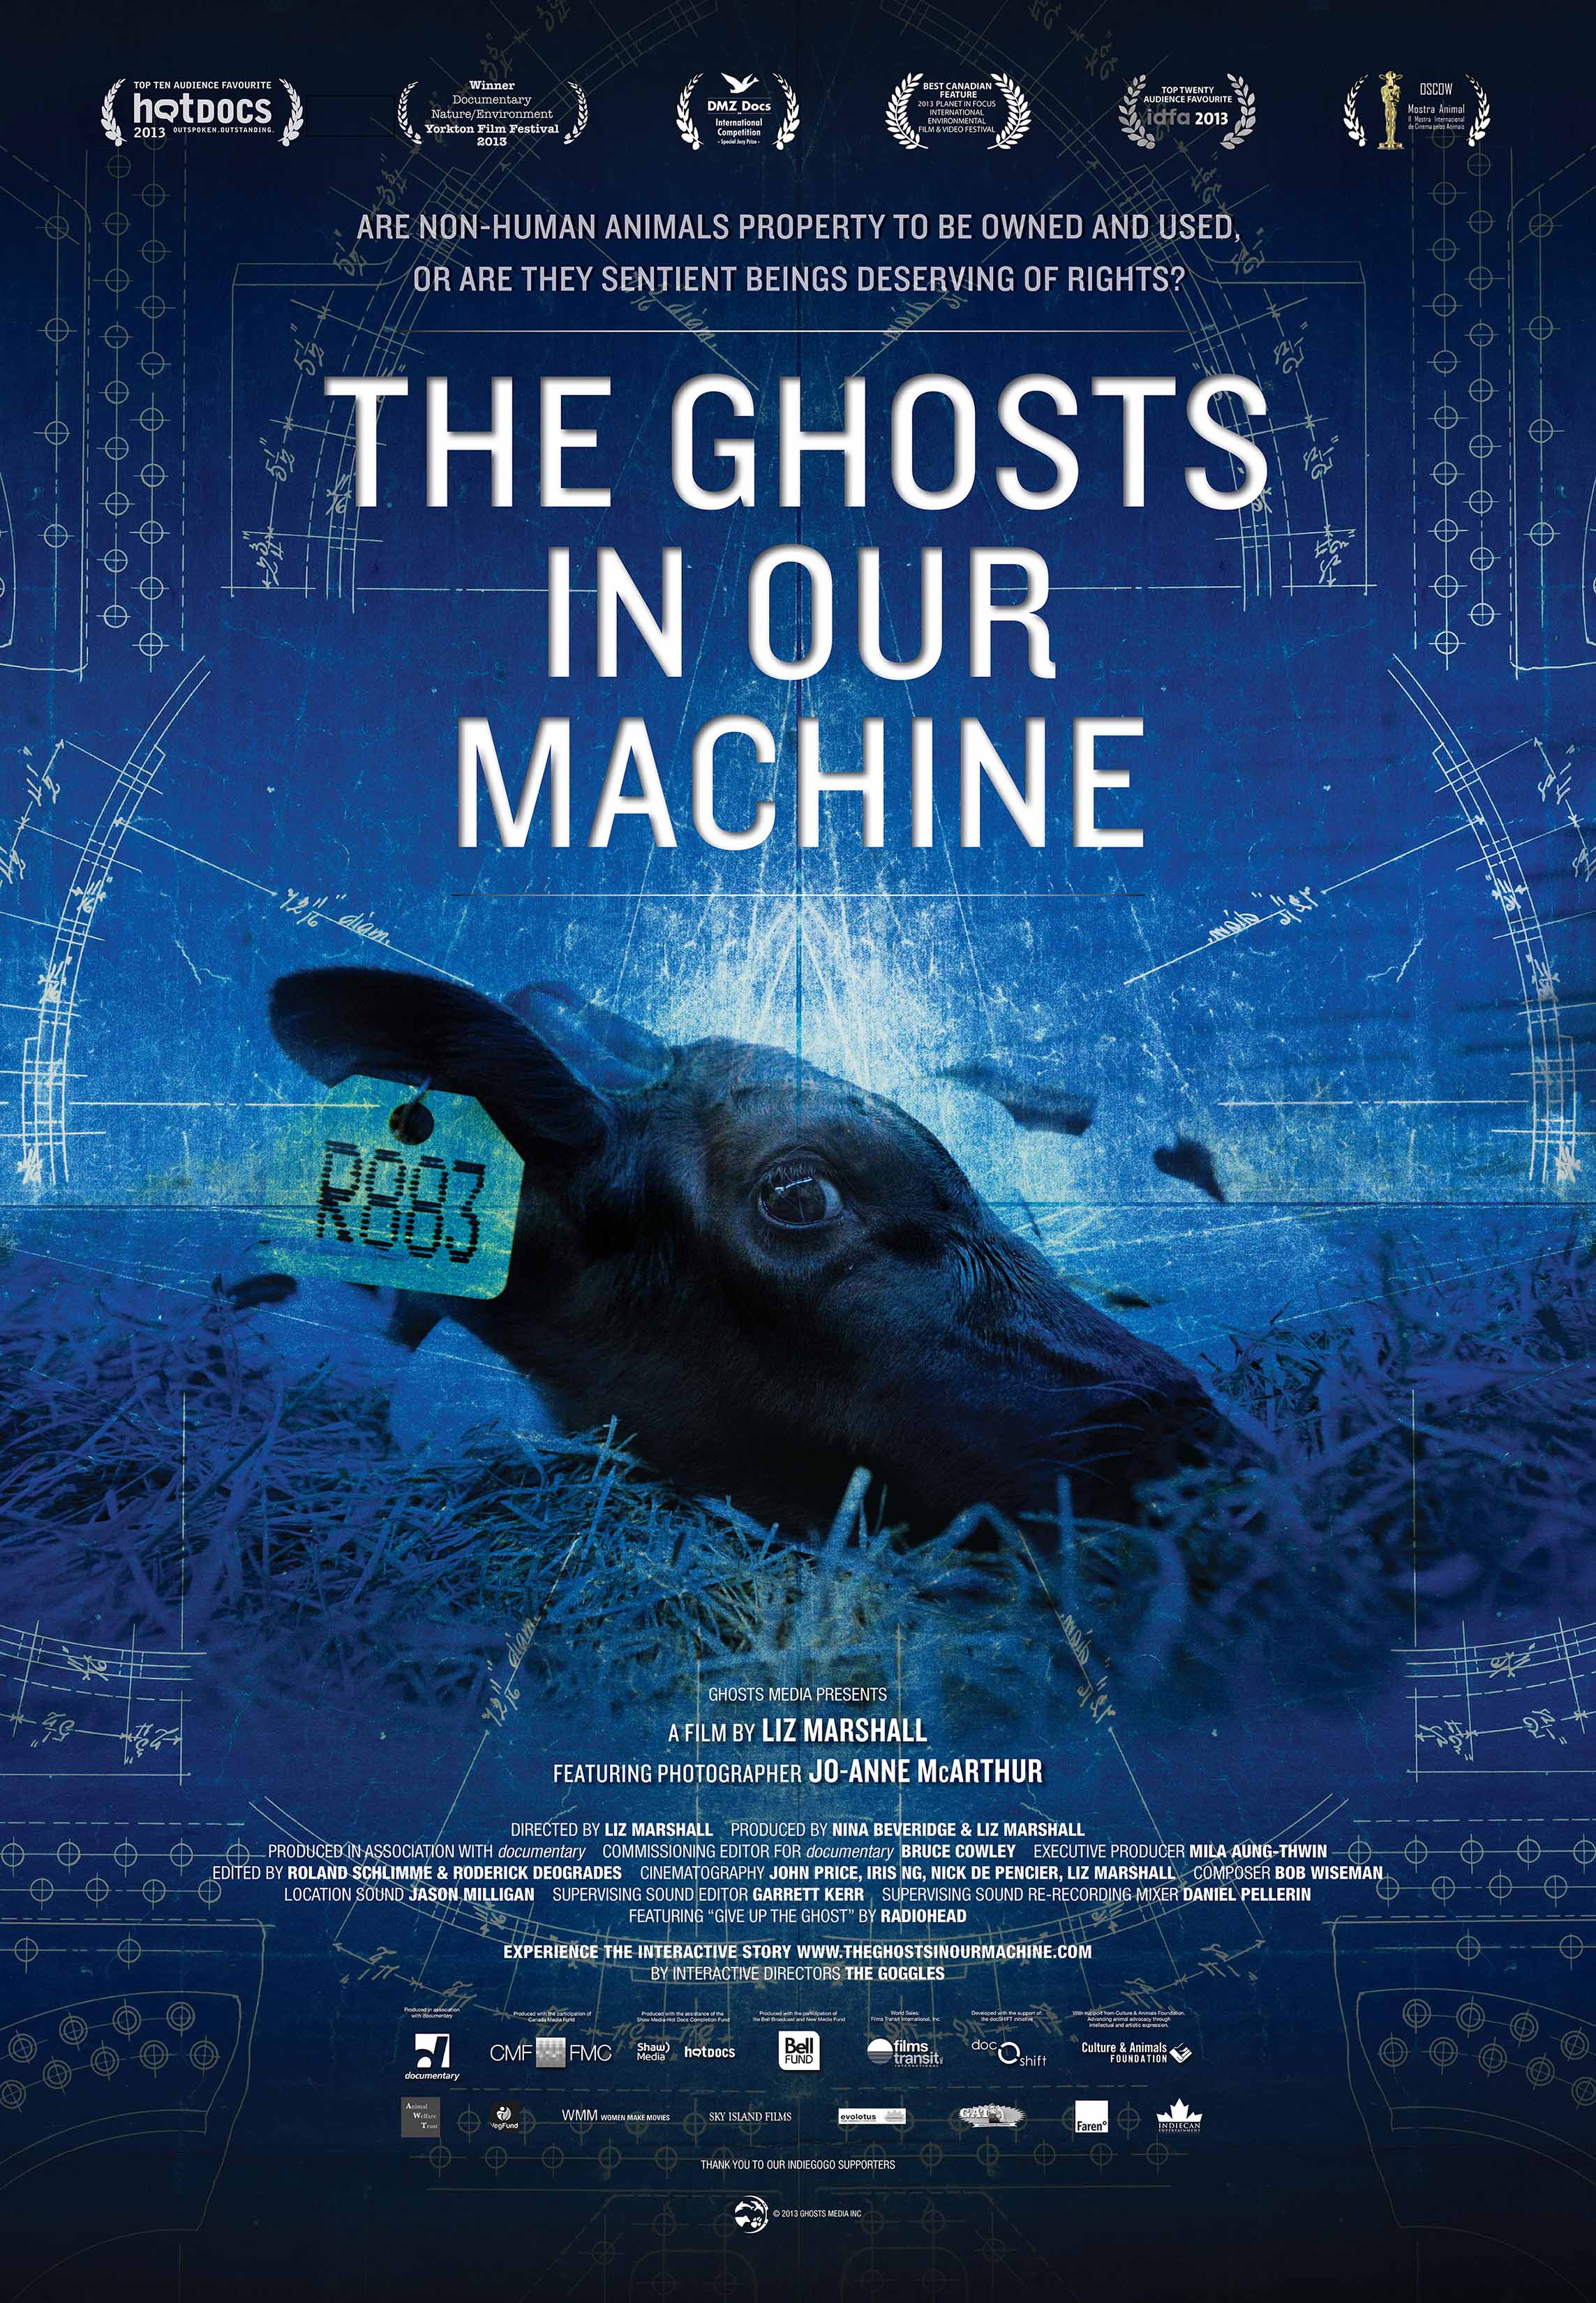 The Ghosts in our Machine